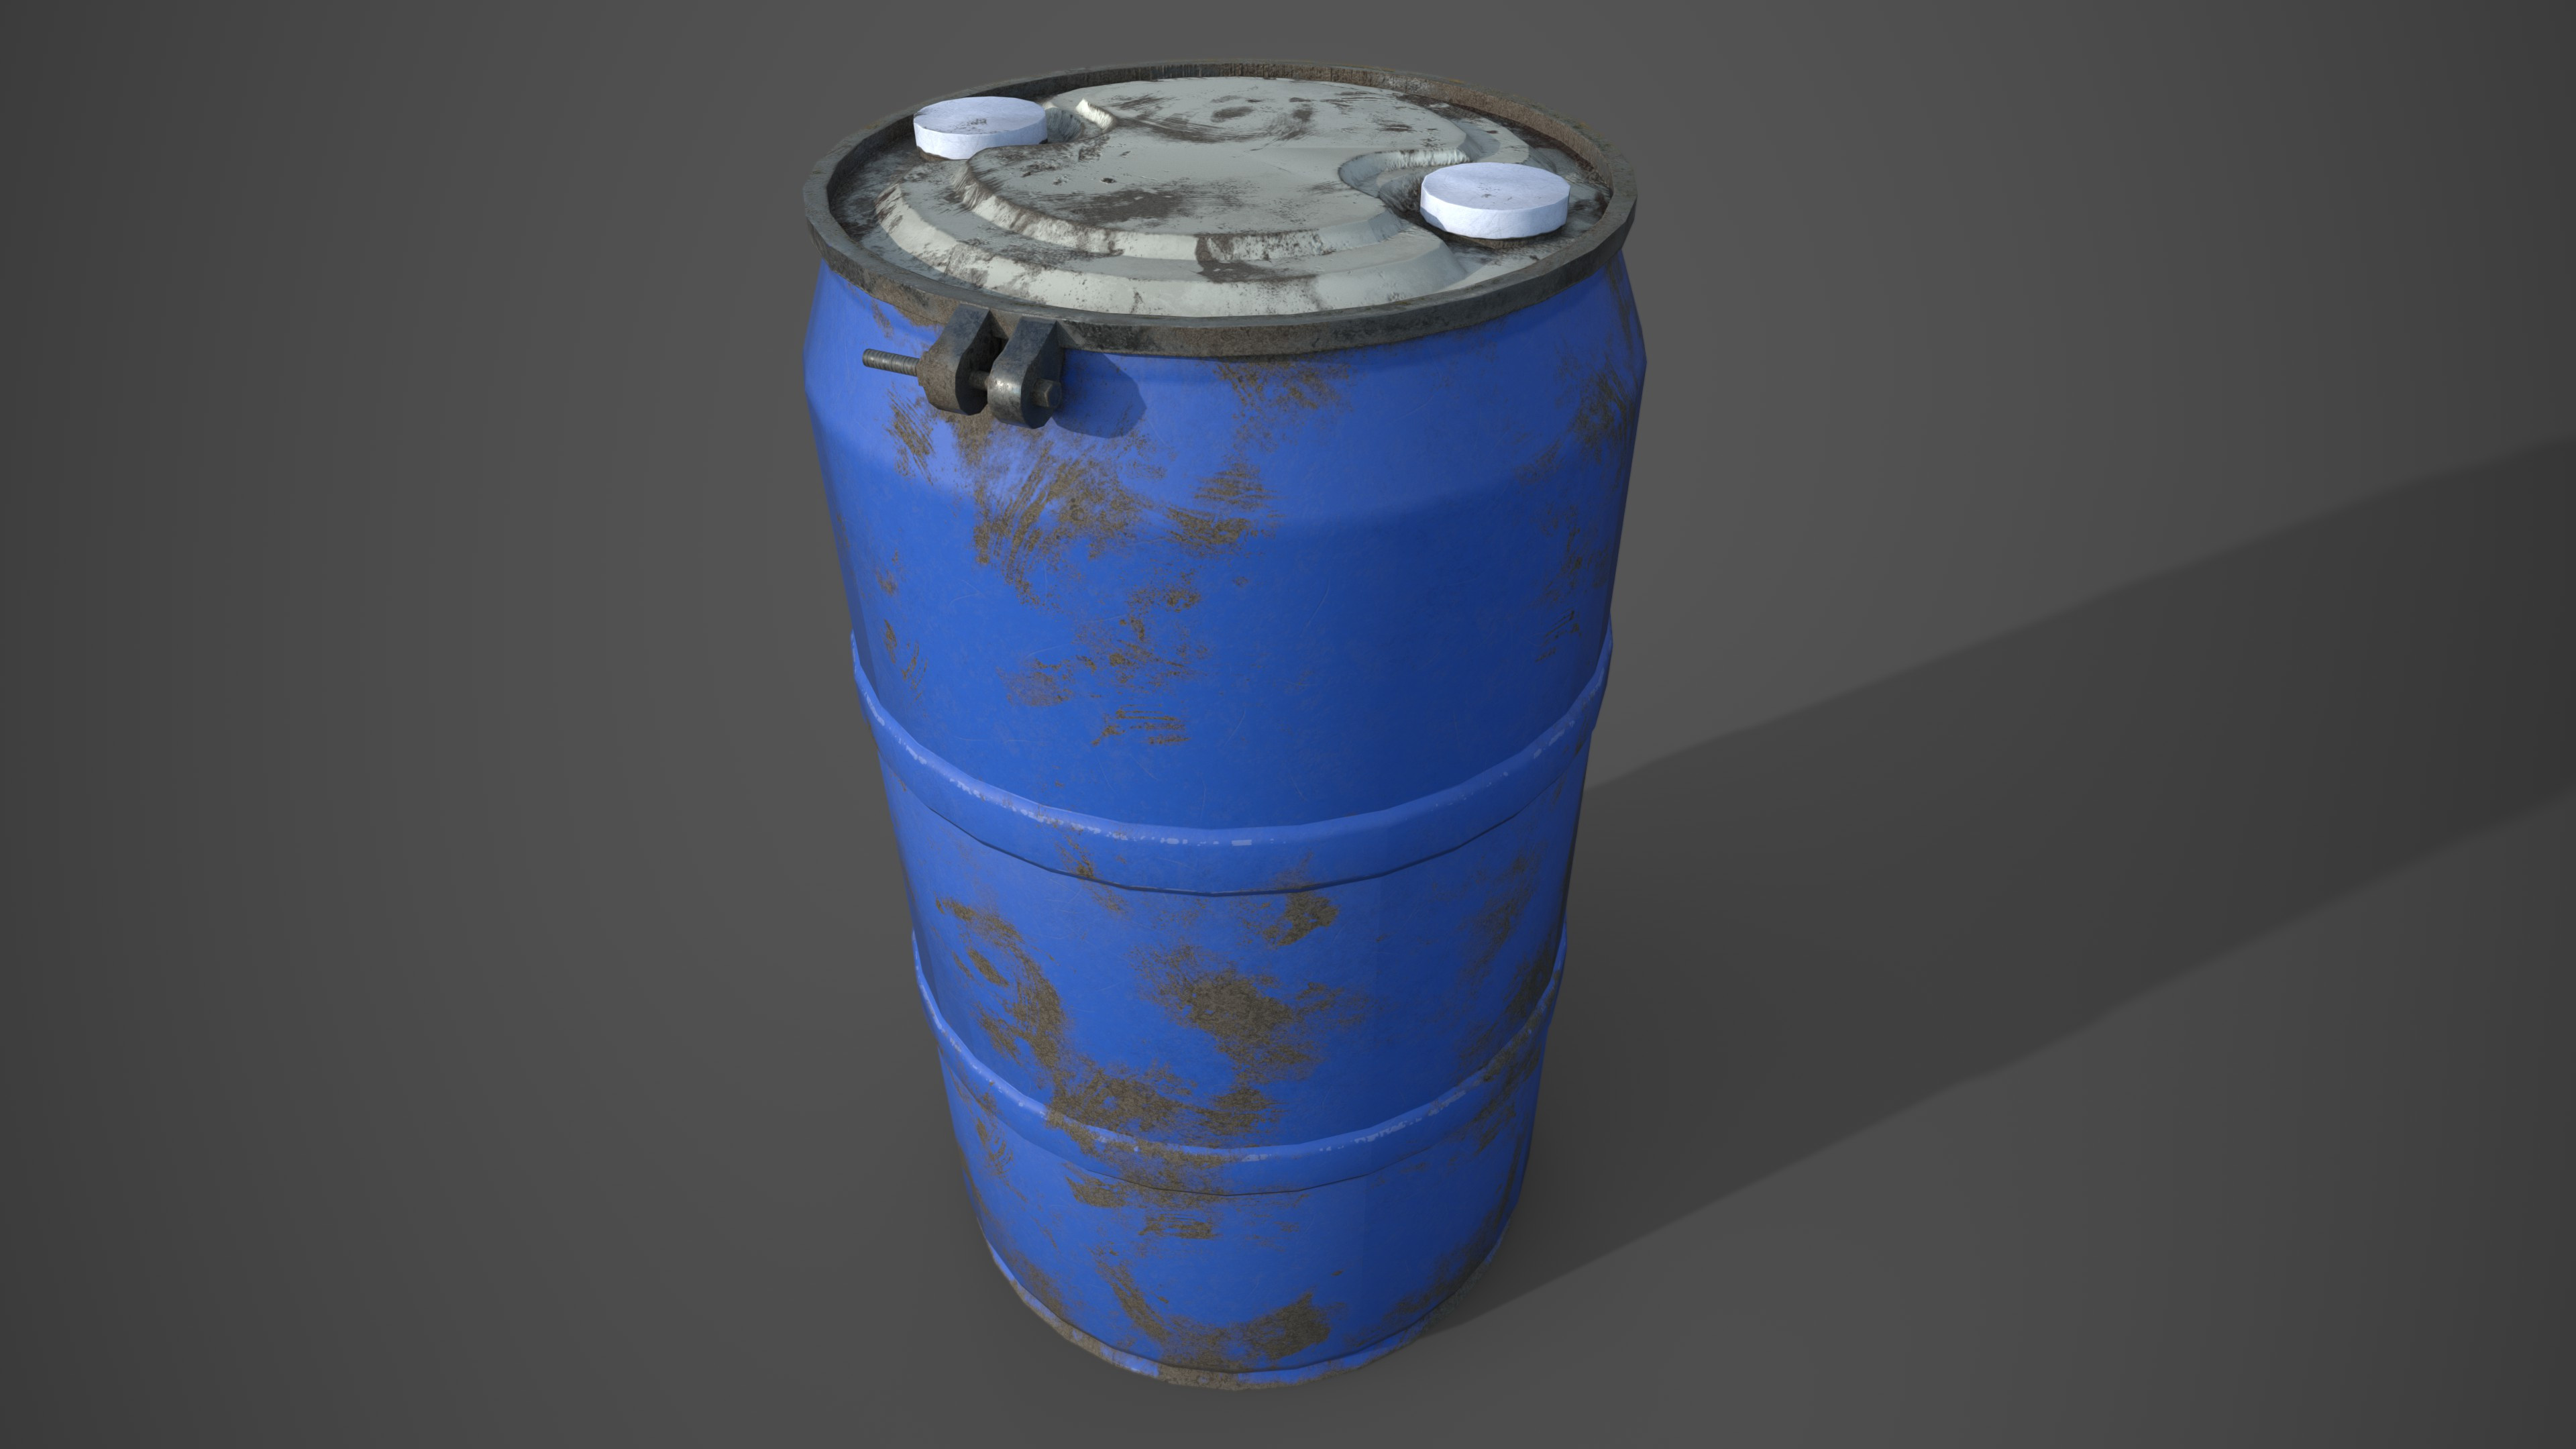 55 Gallon Drum -  Rendered in Iray